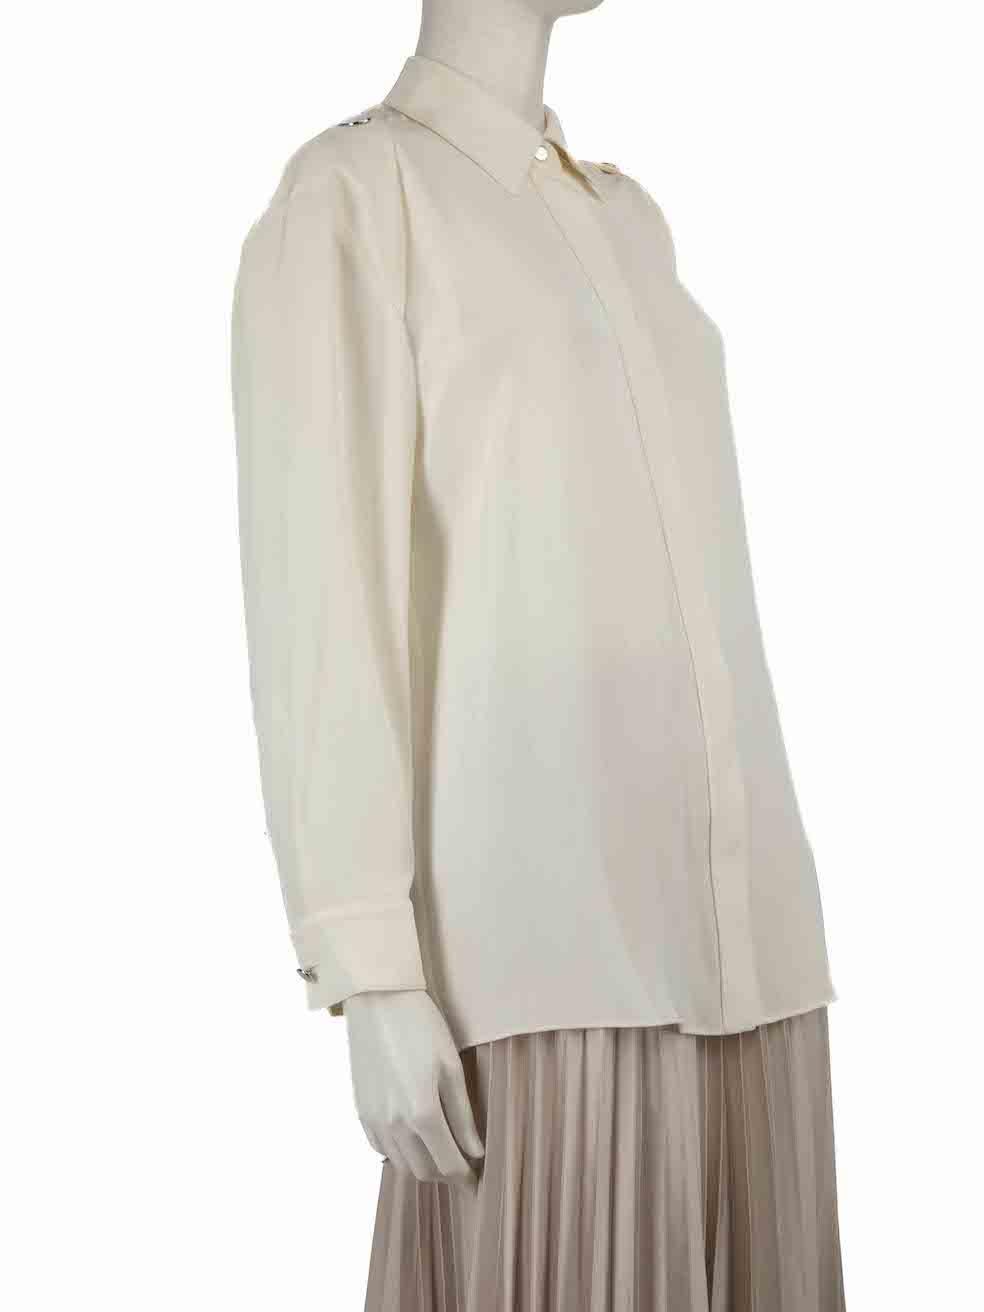 CONDITION is Never worn, with tags. No visible wear to shirt is evident, apart from plucks to the weave at the front due to poor storage on this new Alexander Wang designer resale item.
 
 
 
 Details
 
 
 White
 
 Silk
 
 Shirt
 
 Button up